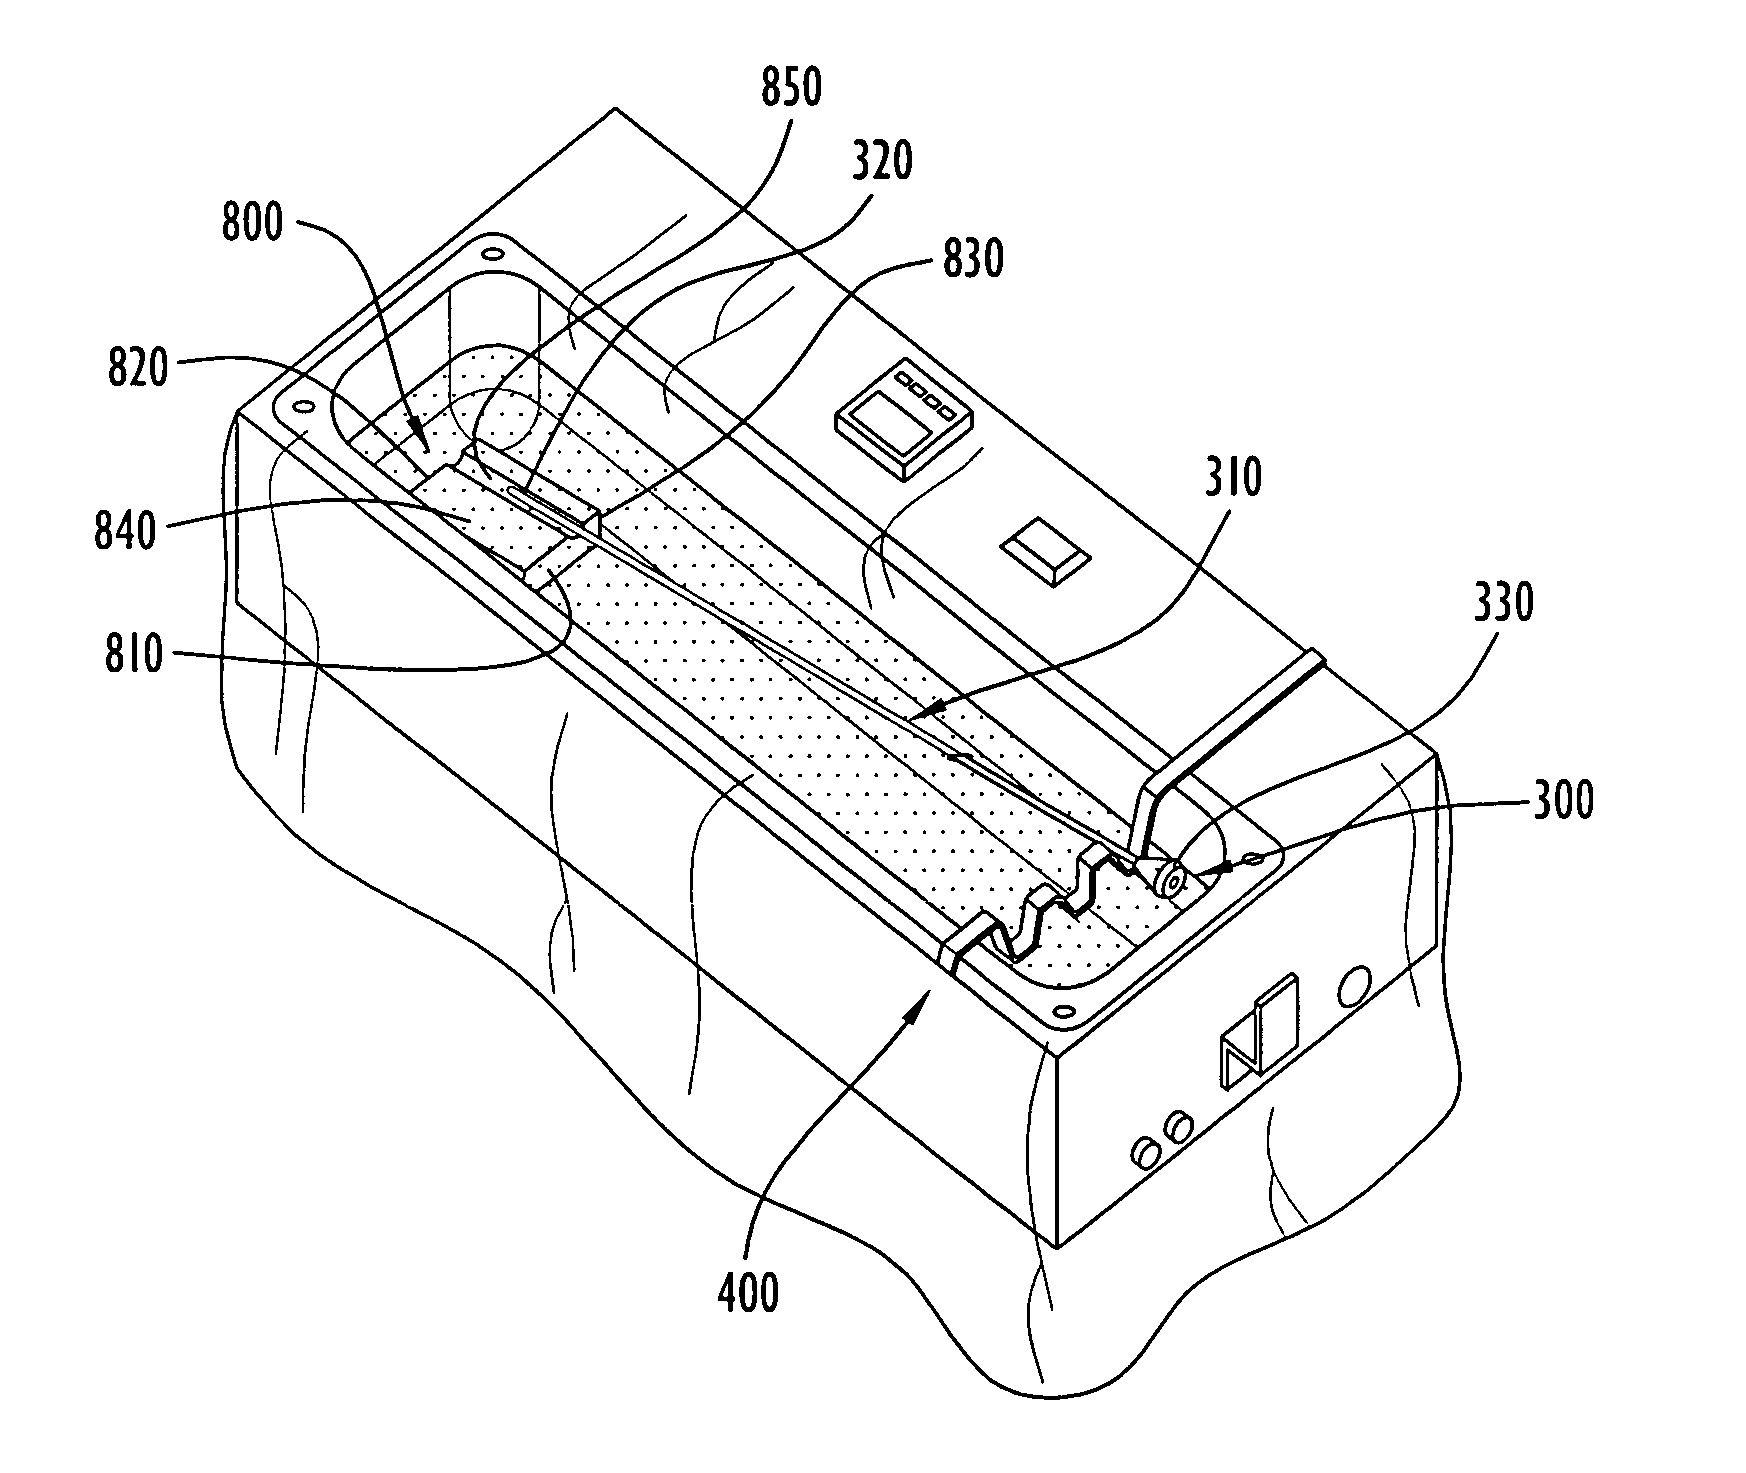 Thermal treatment system instrument rack and method of selectively thermally treating medical instrument portions